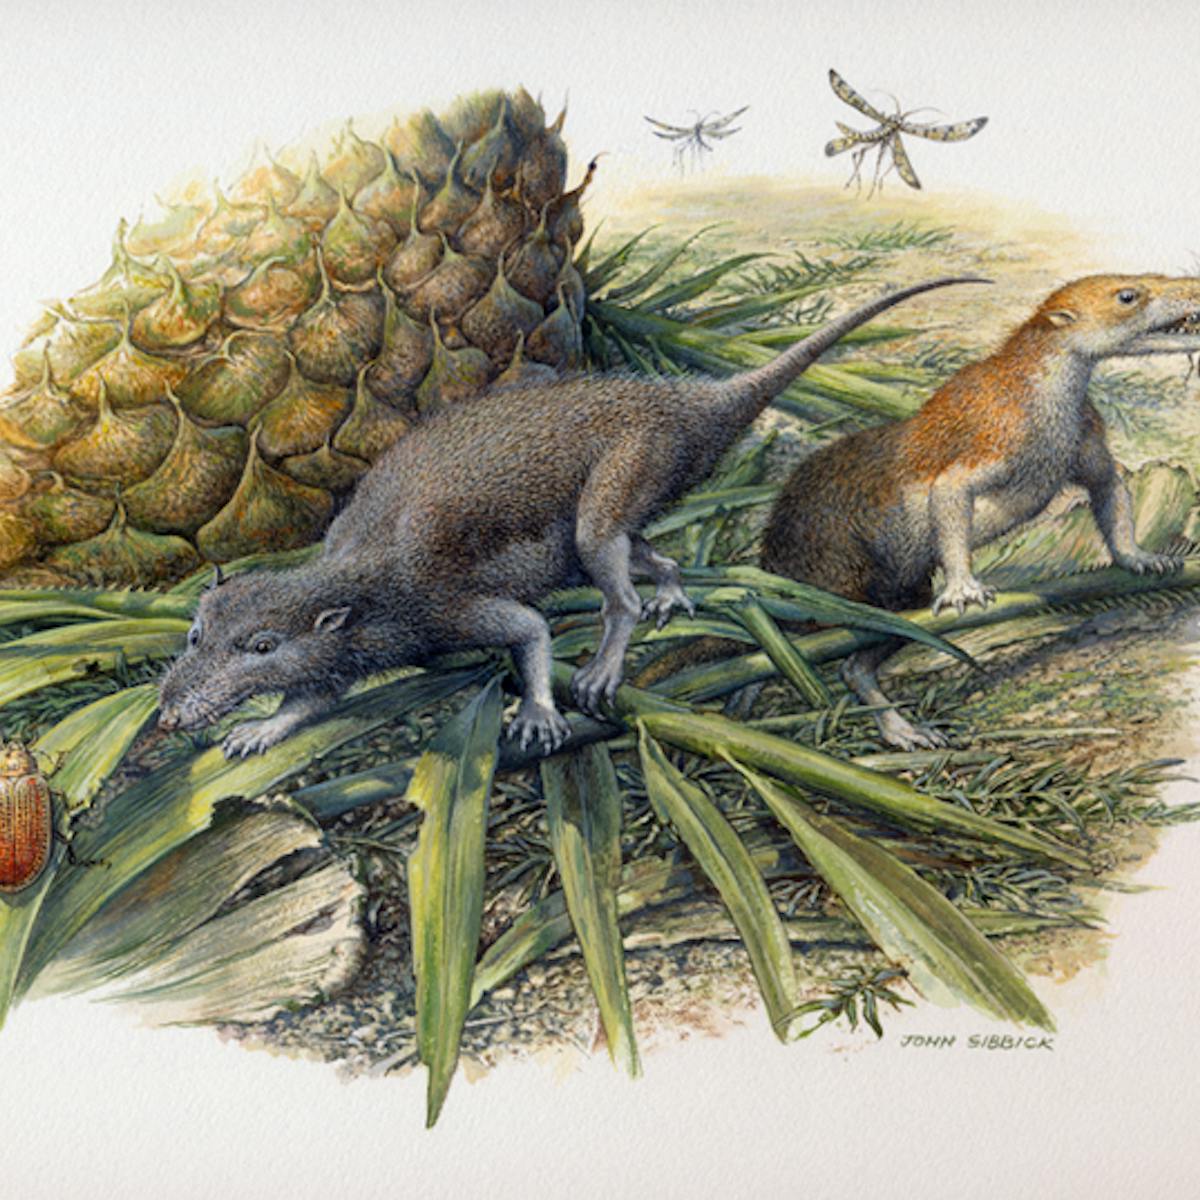 Fossilised teeth reveal first mammals were far from warm blooded